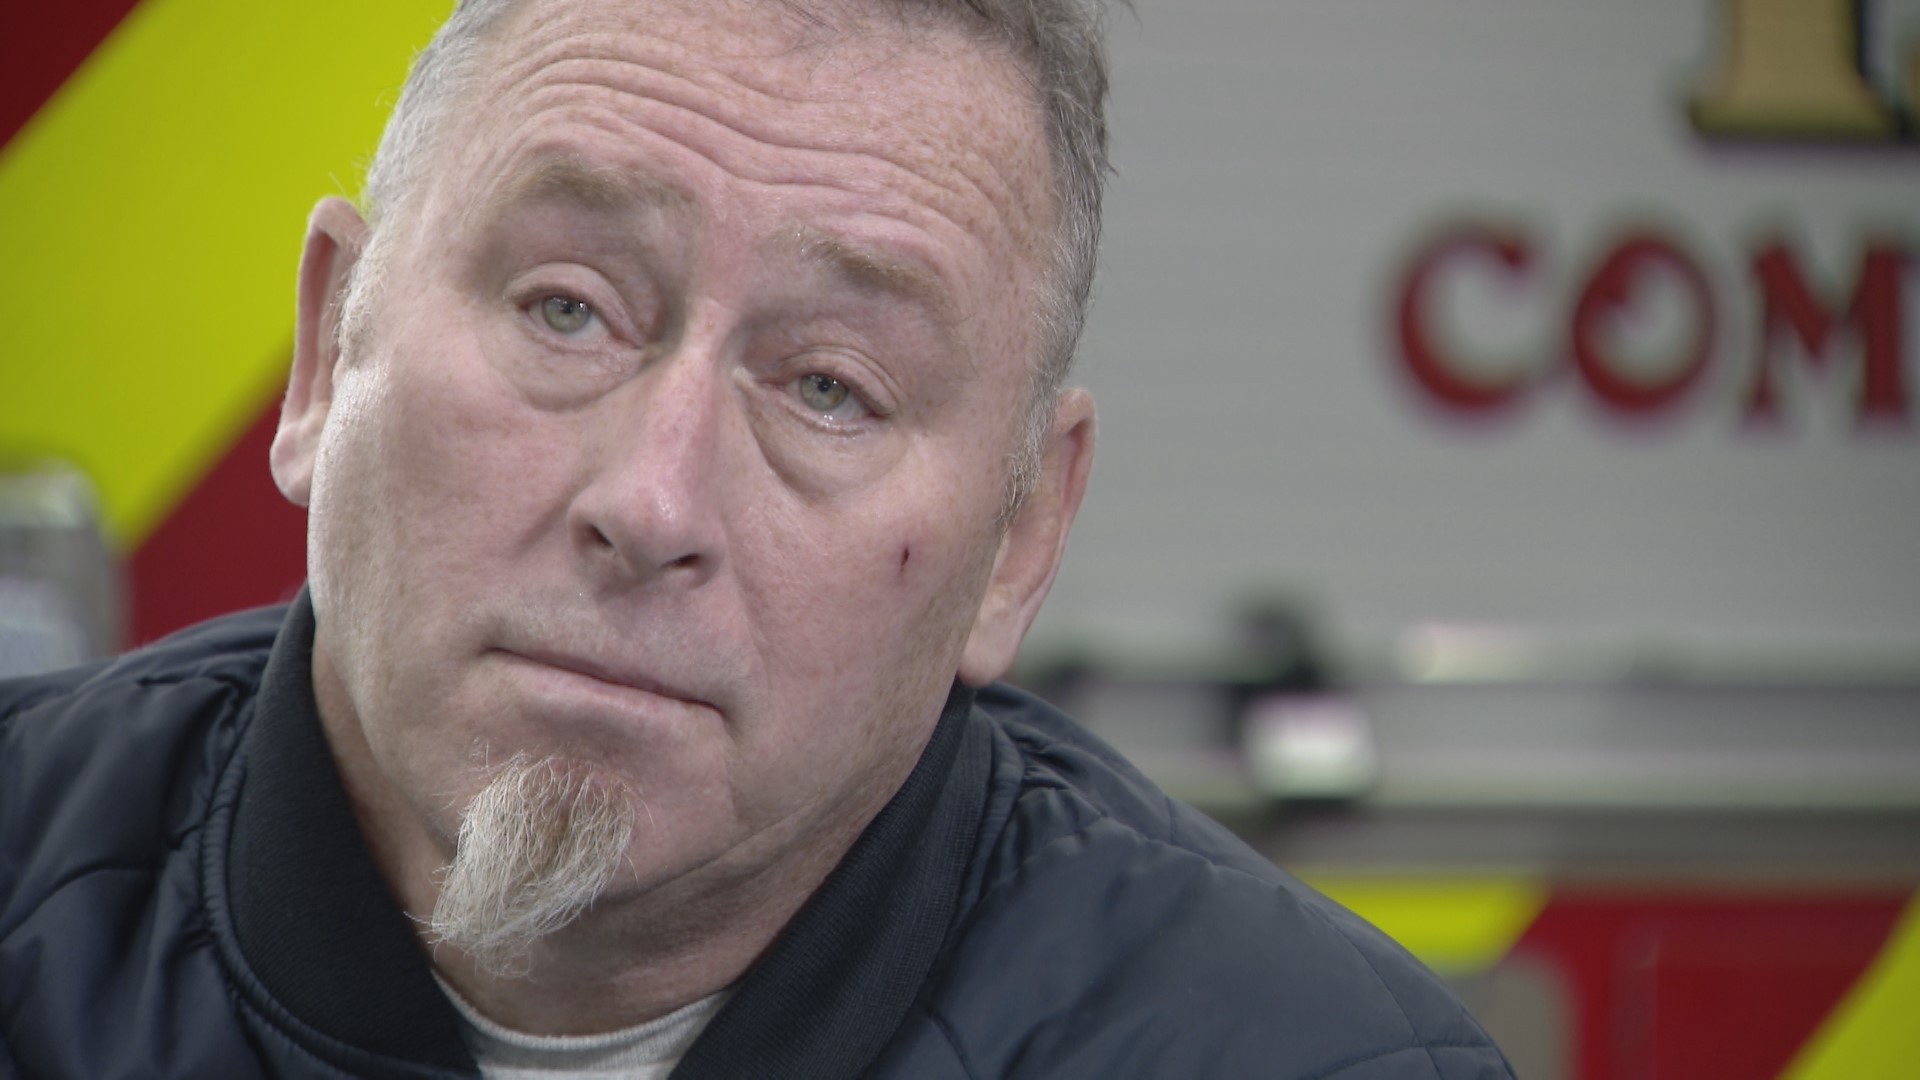 Chuck Solseth, a St. Louis Park native who rose to fire captain in Rochester, is sharing his story to raise awareness about a larger issue in the firefighter ranks.